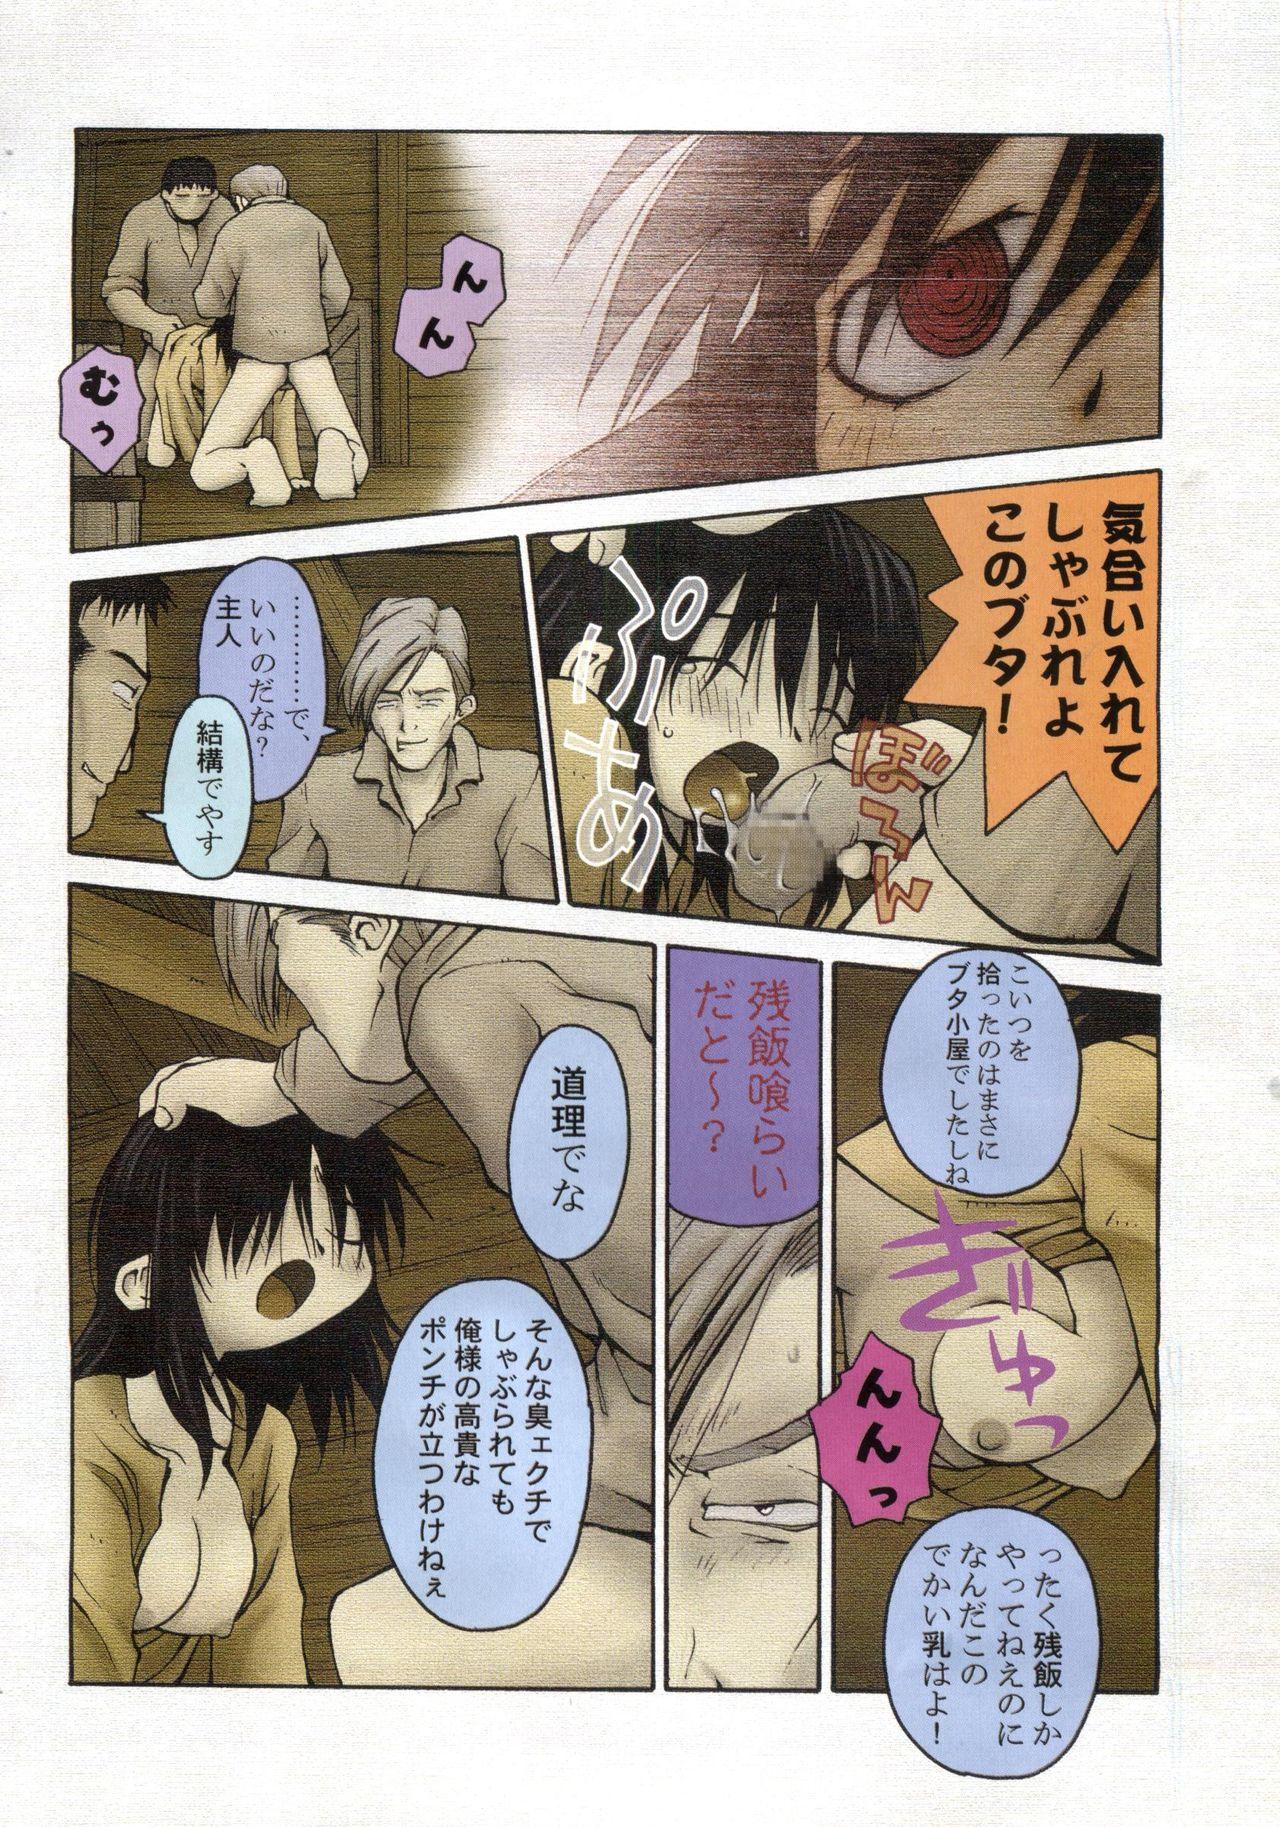 Show Pai;kuu 1999 March Vol. 18 - Kare kano Mamotte shugogetten Oral Sex Porn - Page 5